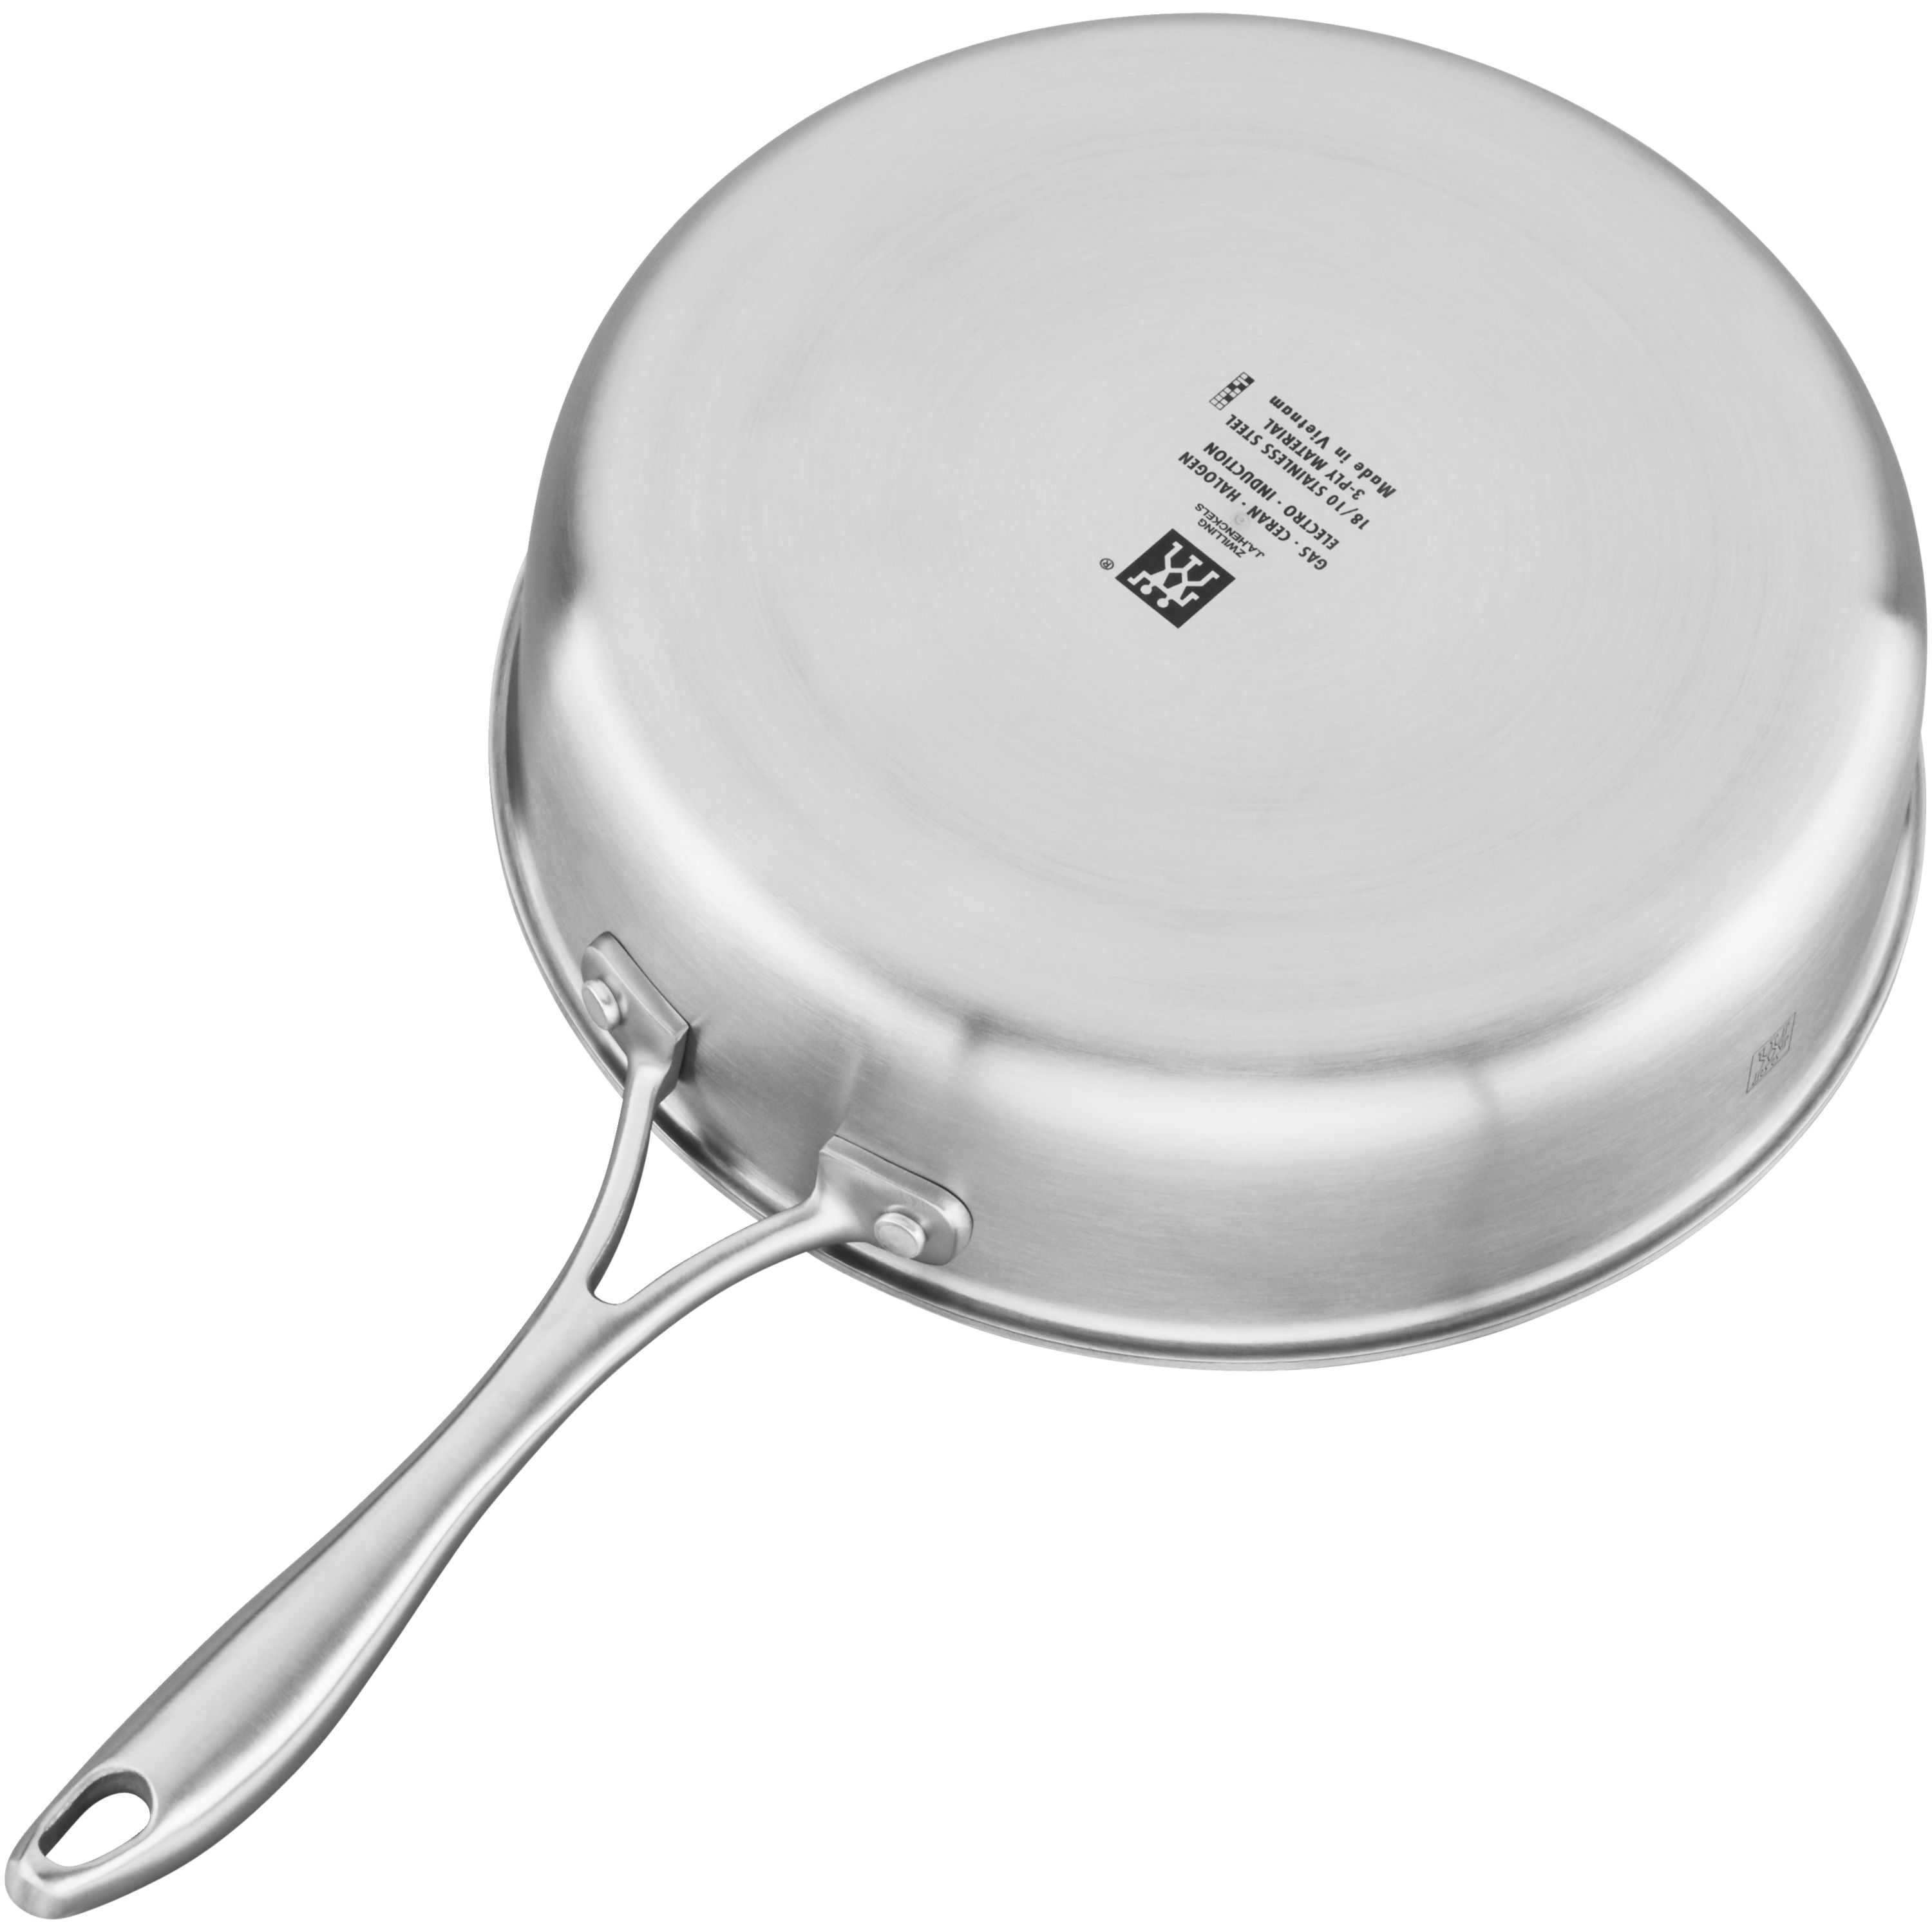  ZWILLING Spirit Ceramic Nonstick Fry Pan with Lid, 9.5